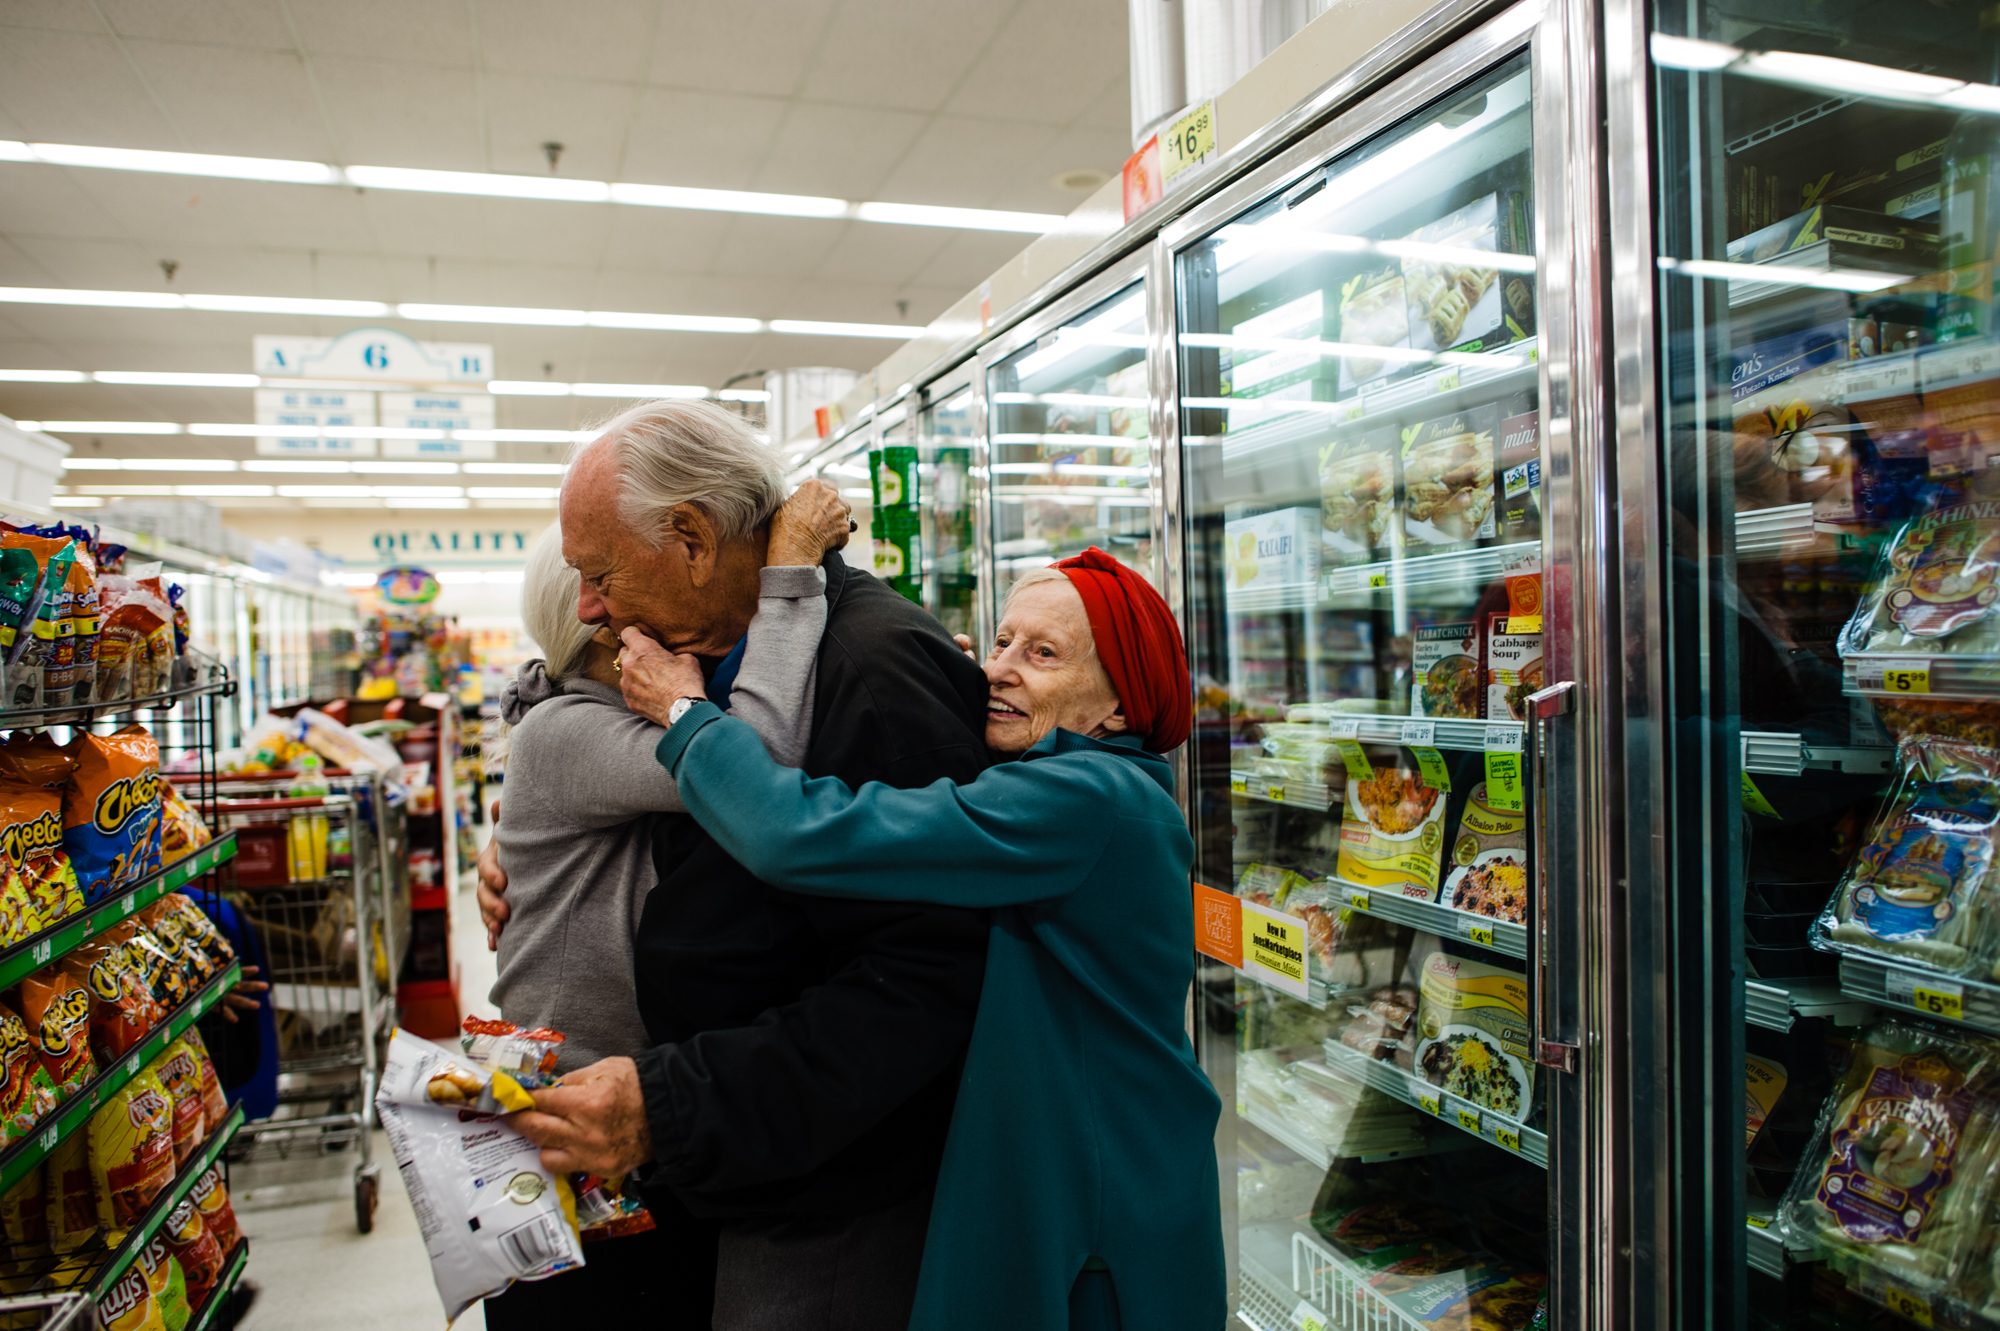  Jeanie and Adina embrace Will in the supermarket aisle.  